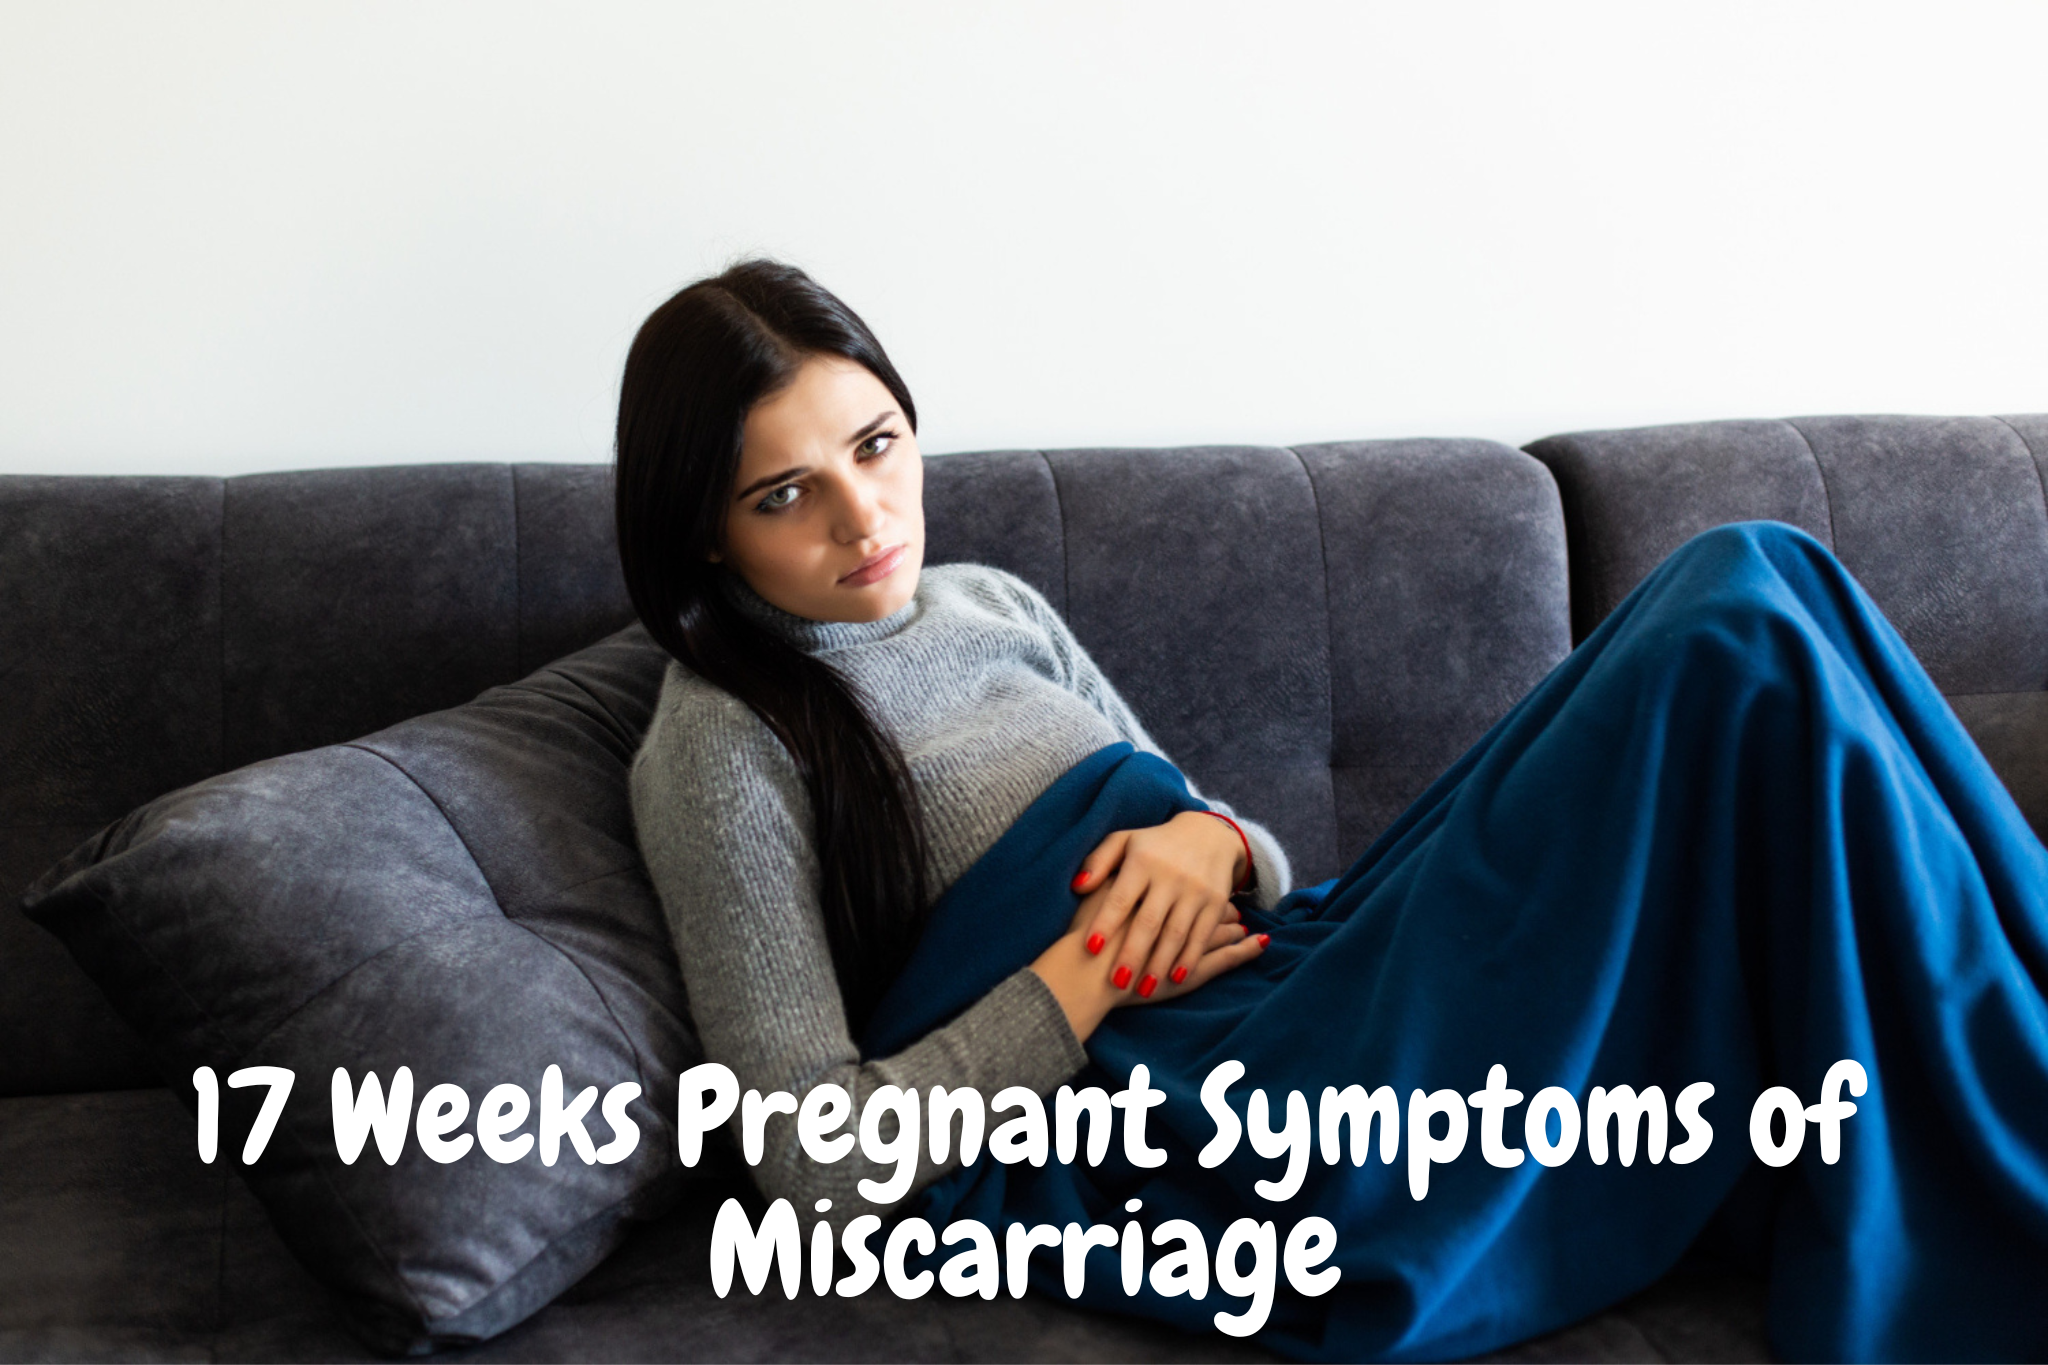 17 weeks pregnant symptoms of miscarriage